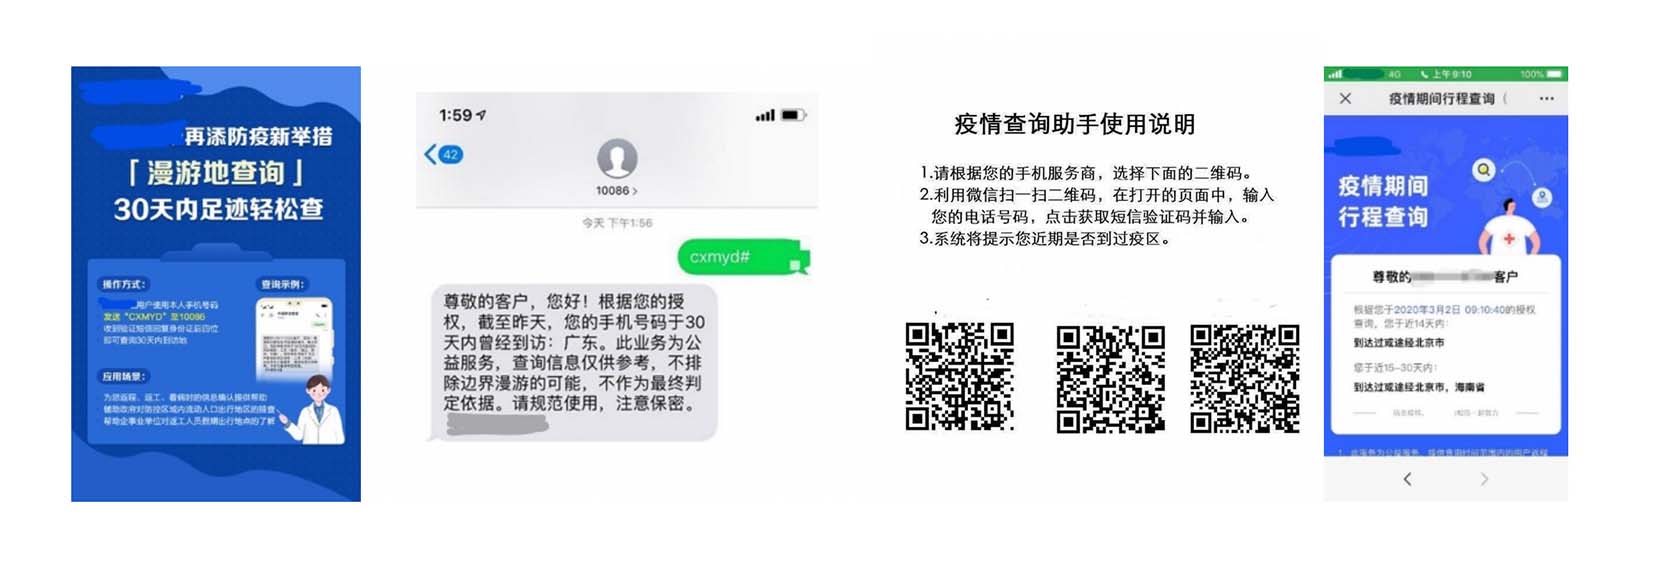 China launches covid-19 roaming inquiry on WeChat